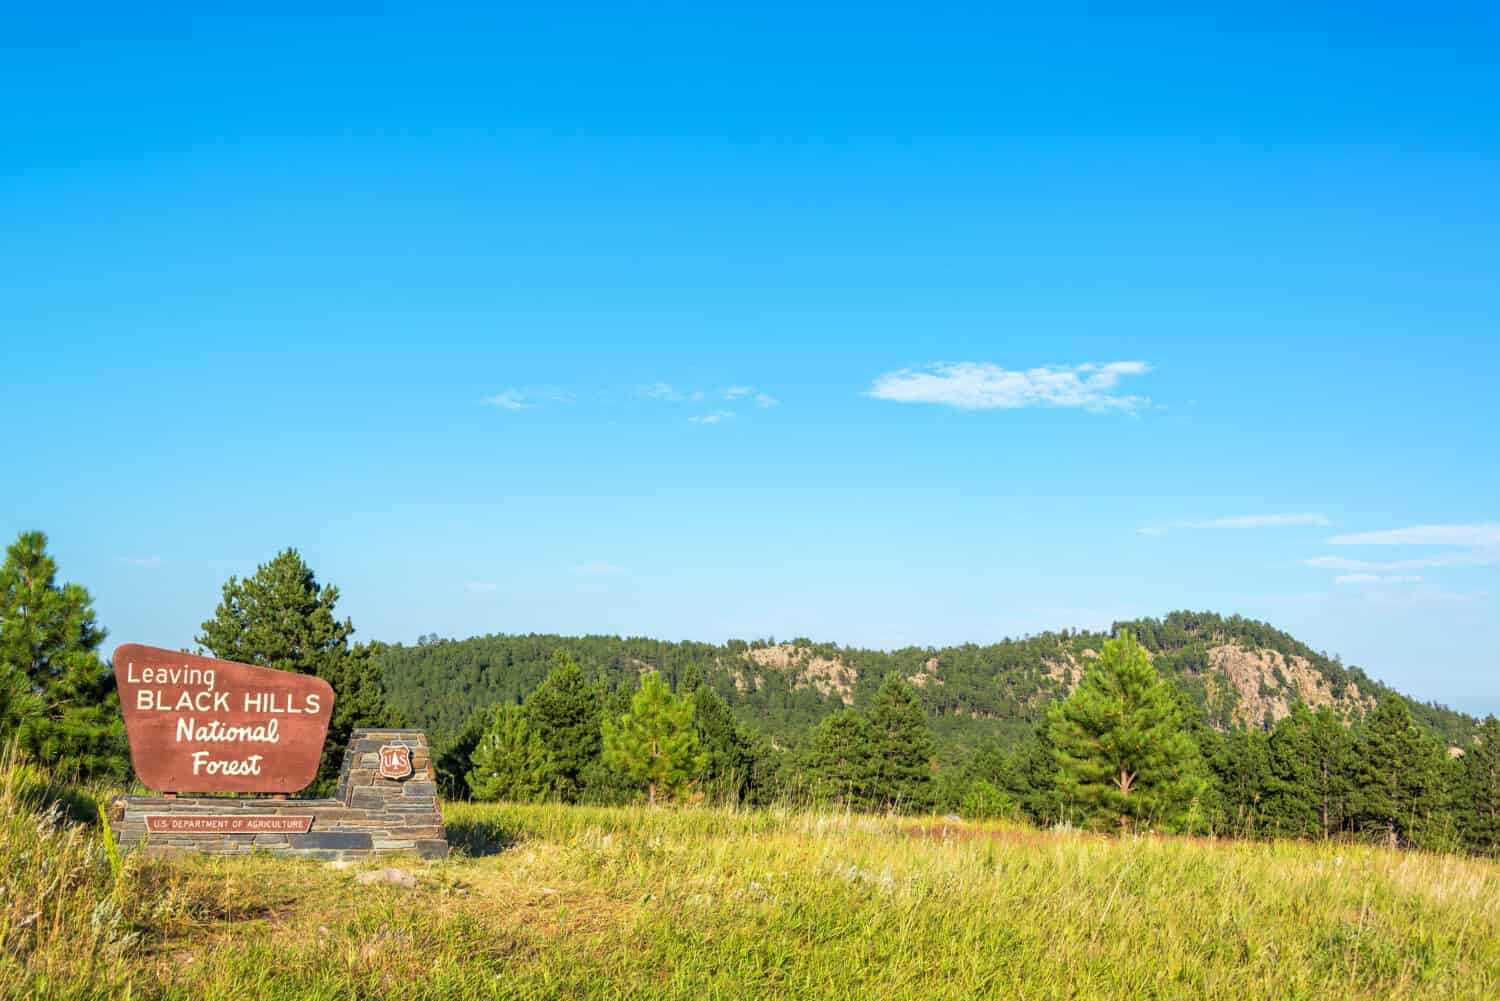 Sign marking the boundary of the Black Hills National Forest